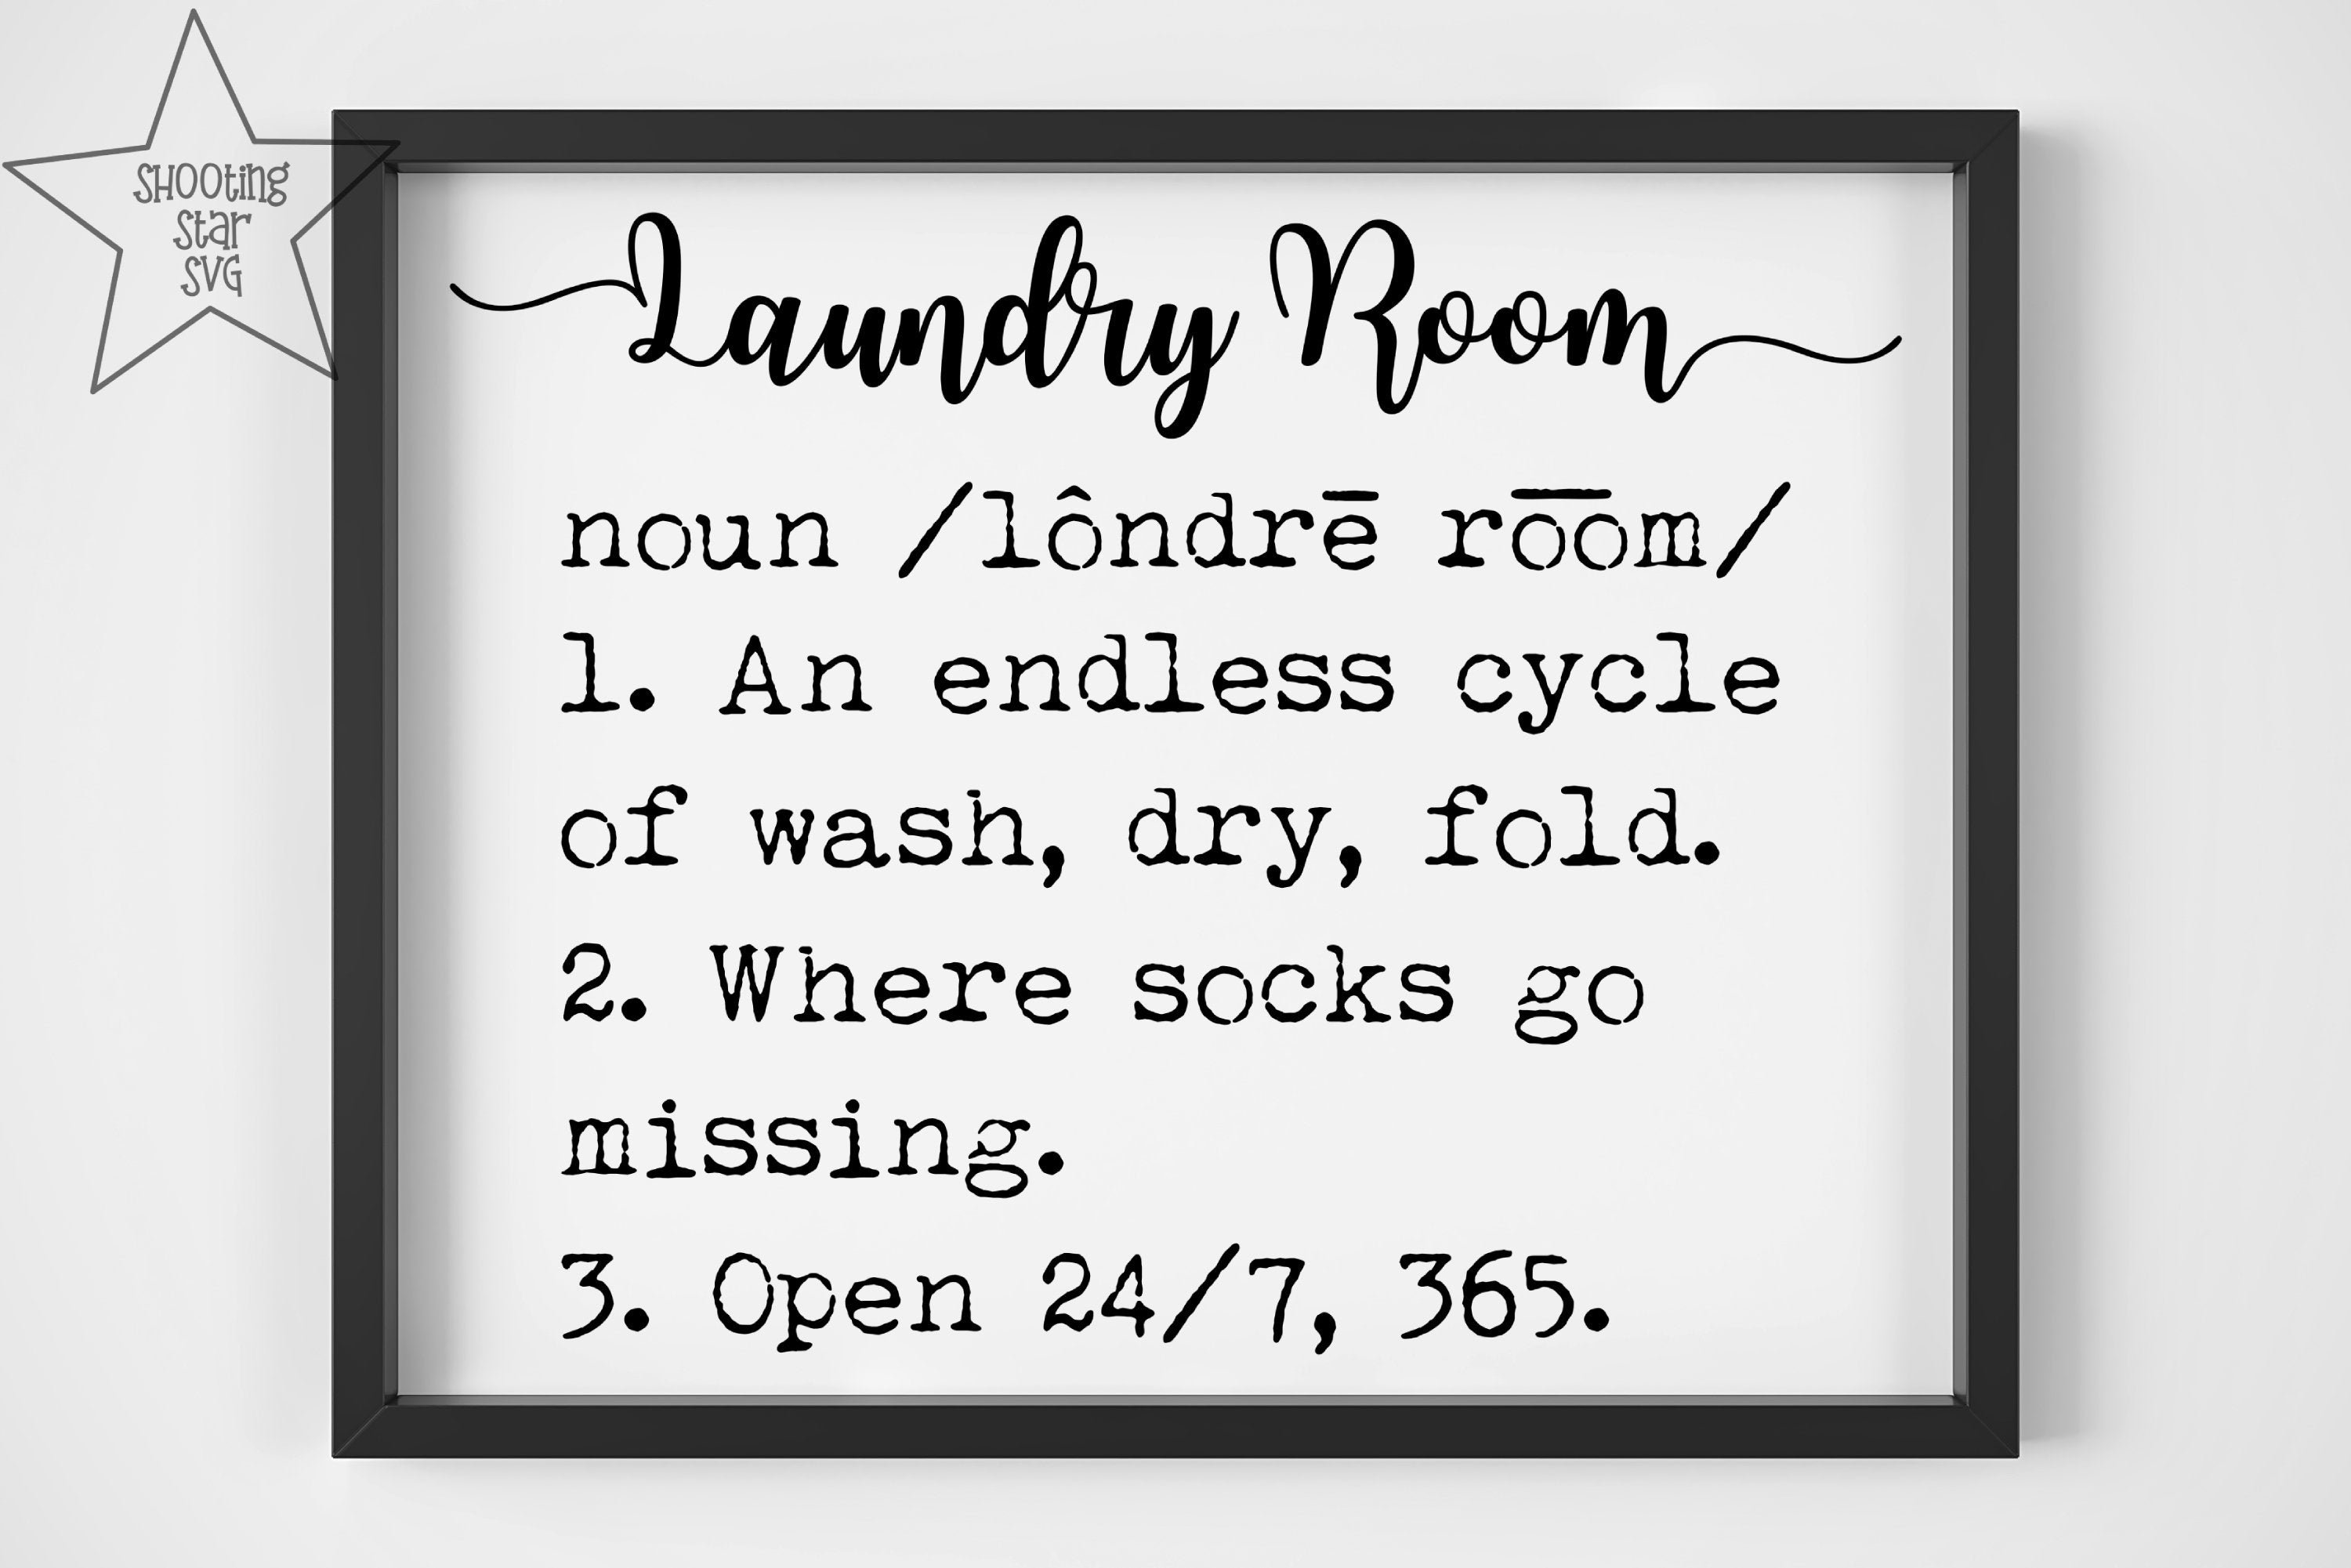 Laundry Room Definition SVG - Funny Laundry Room Definition